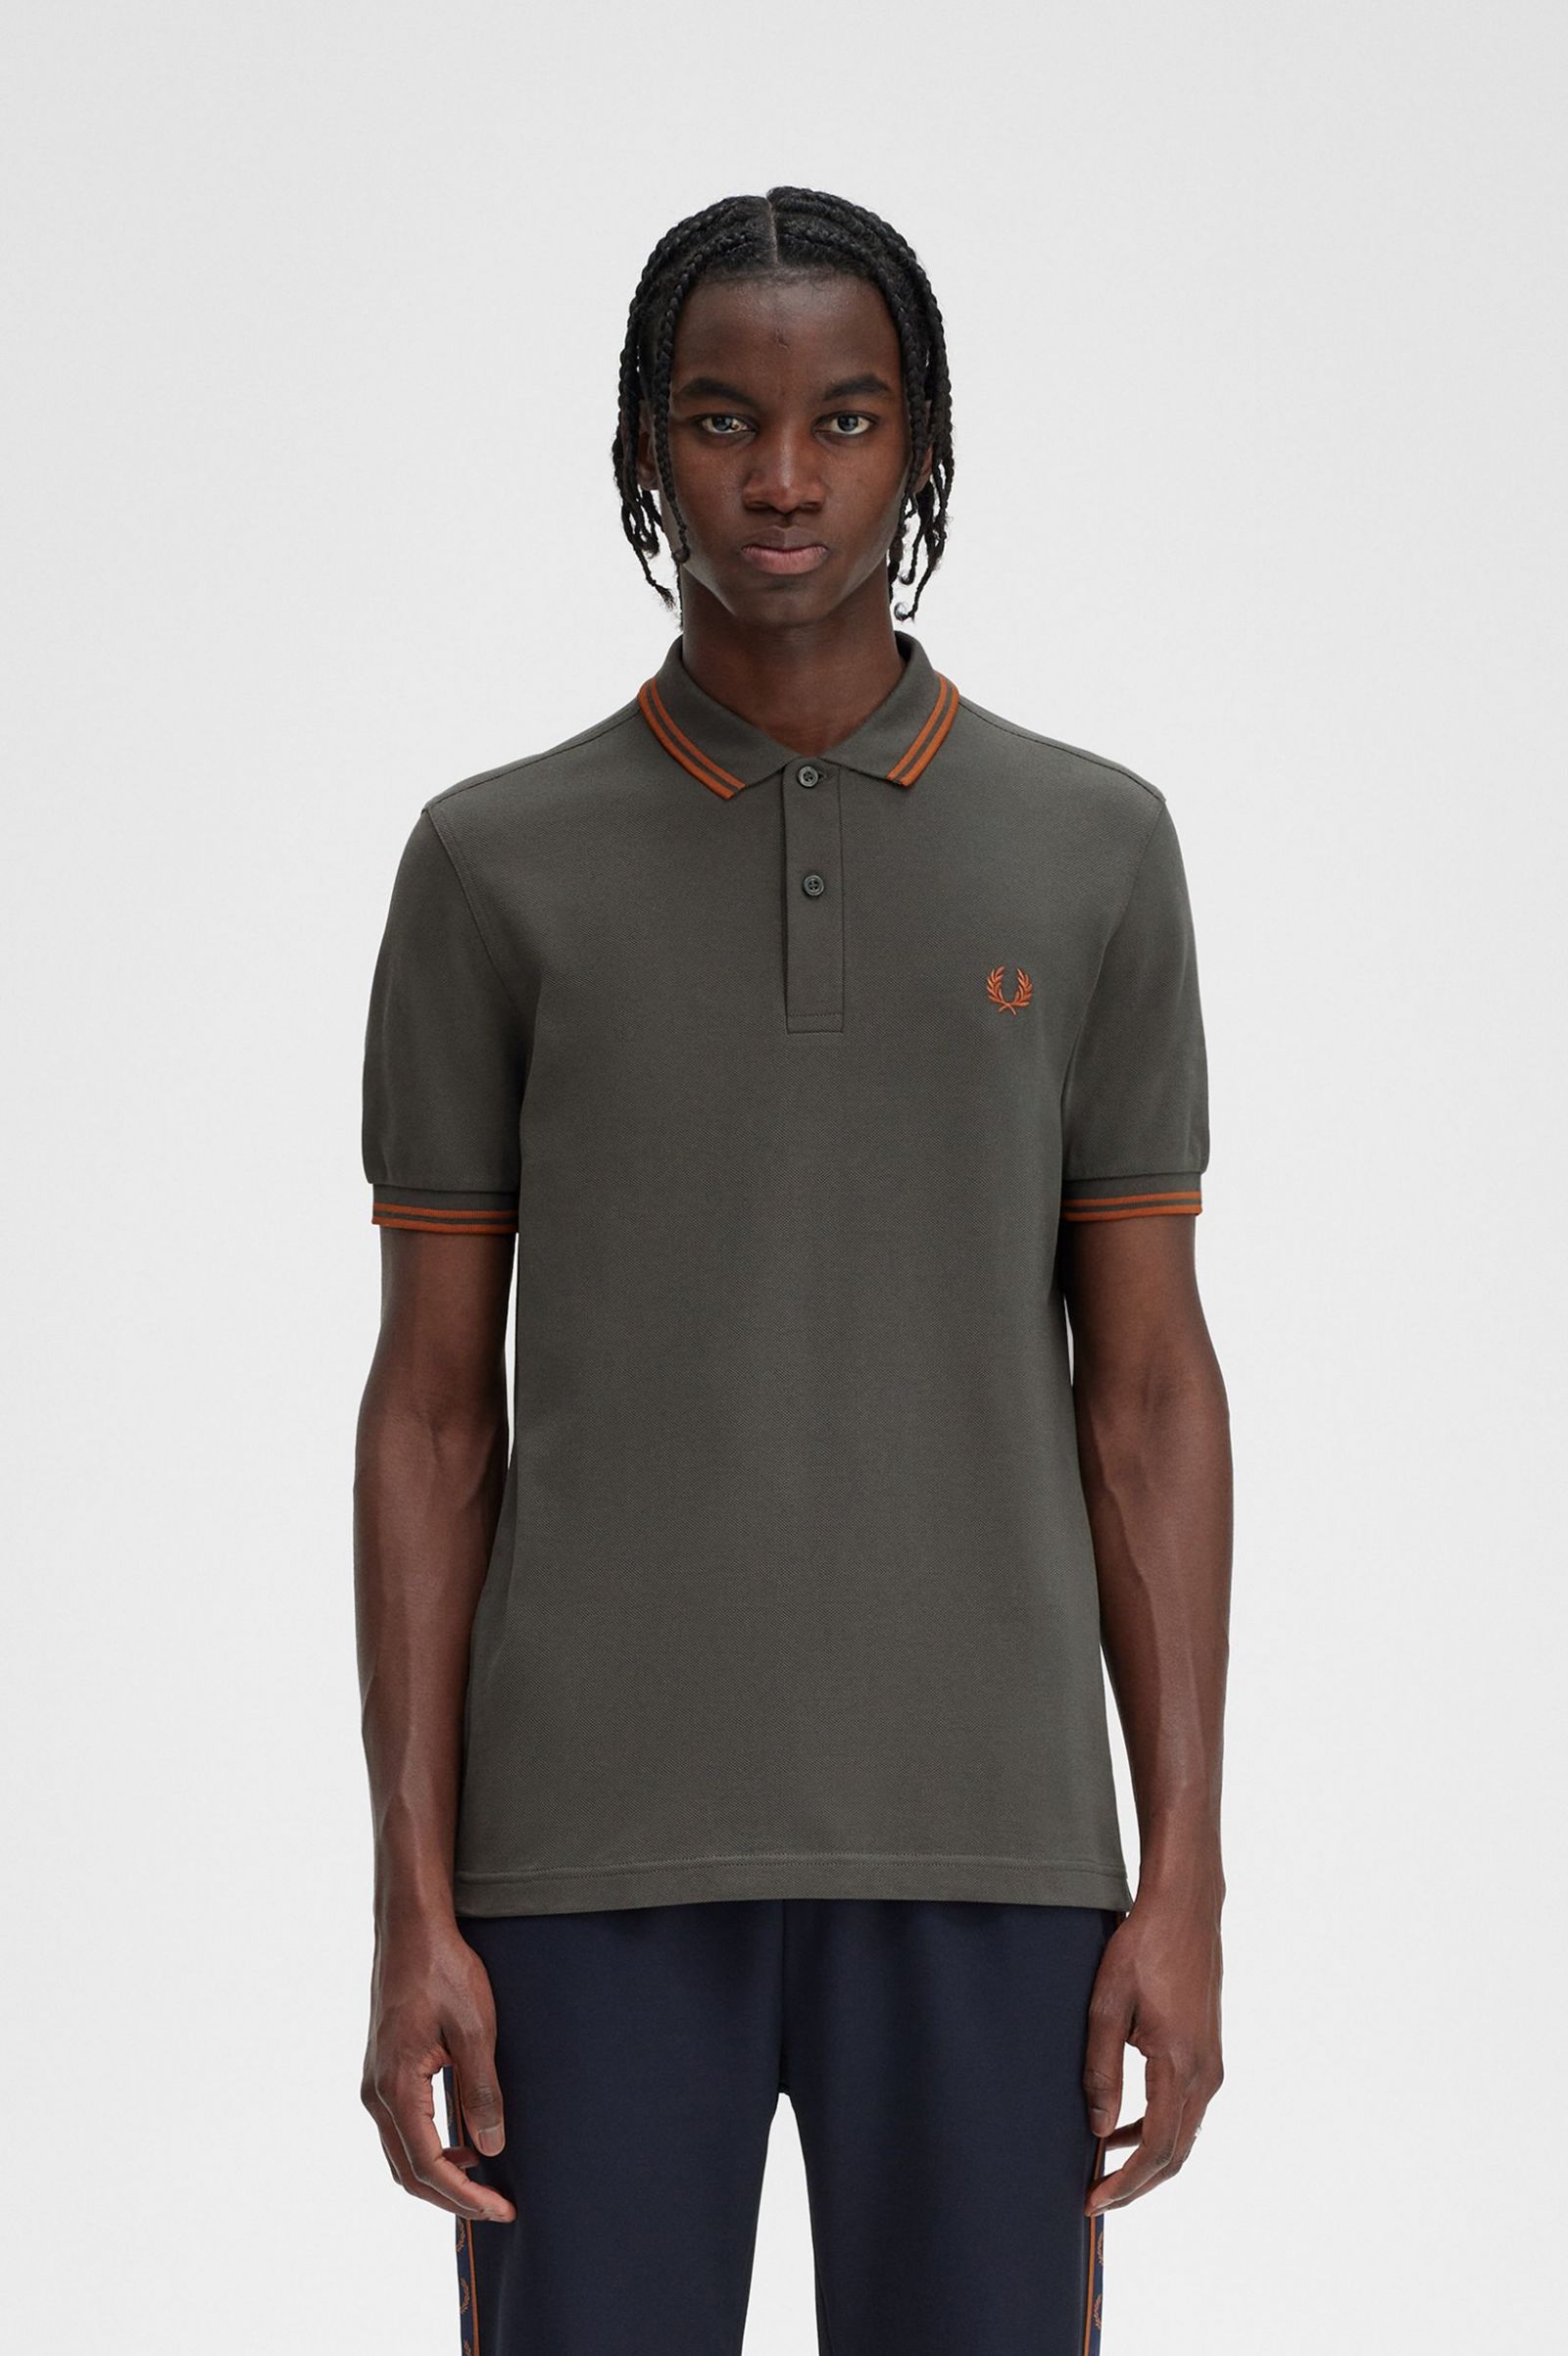 Twin Tipped Fred Perry Shirt in Field Green